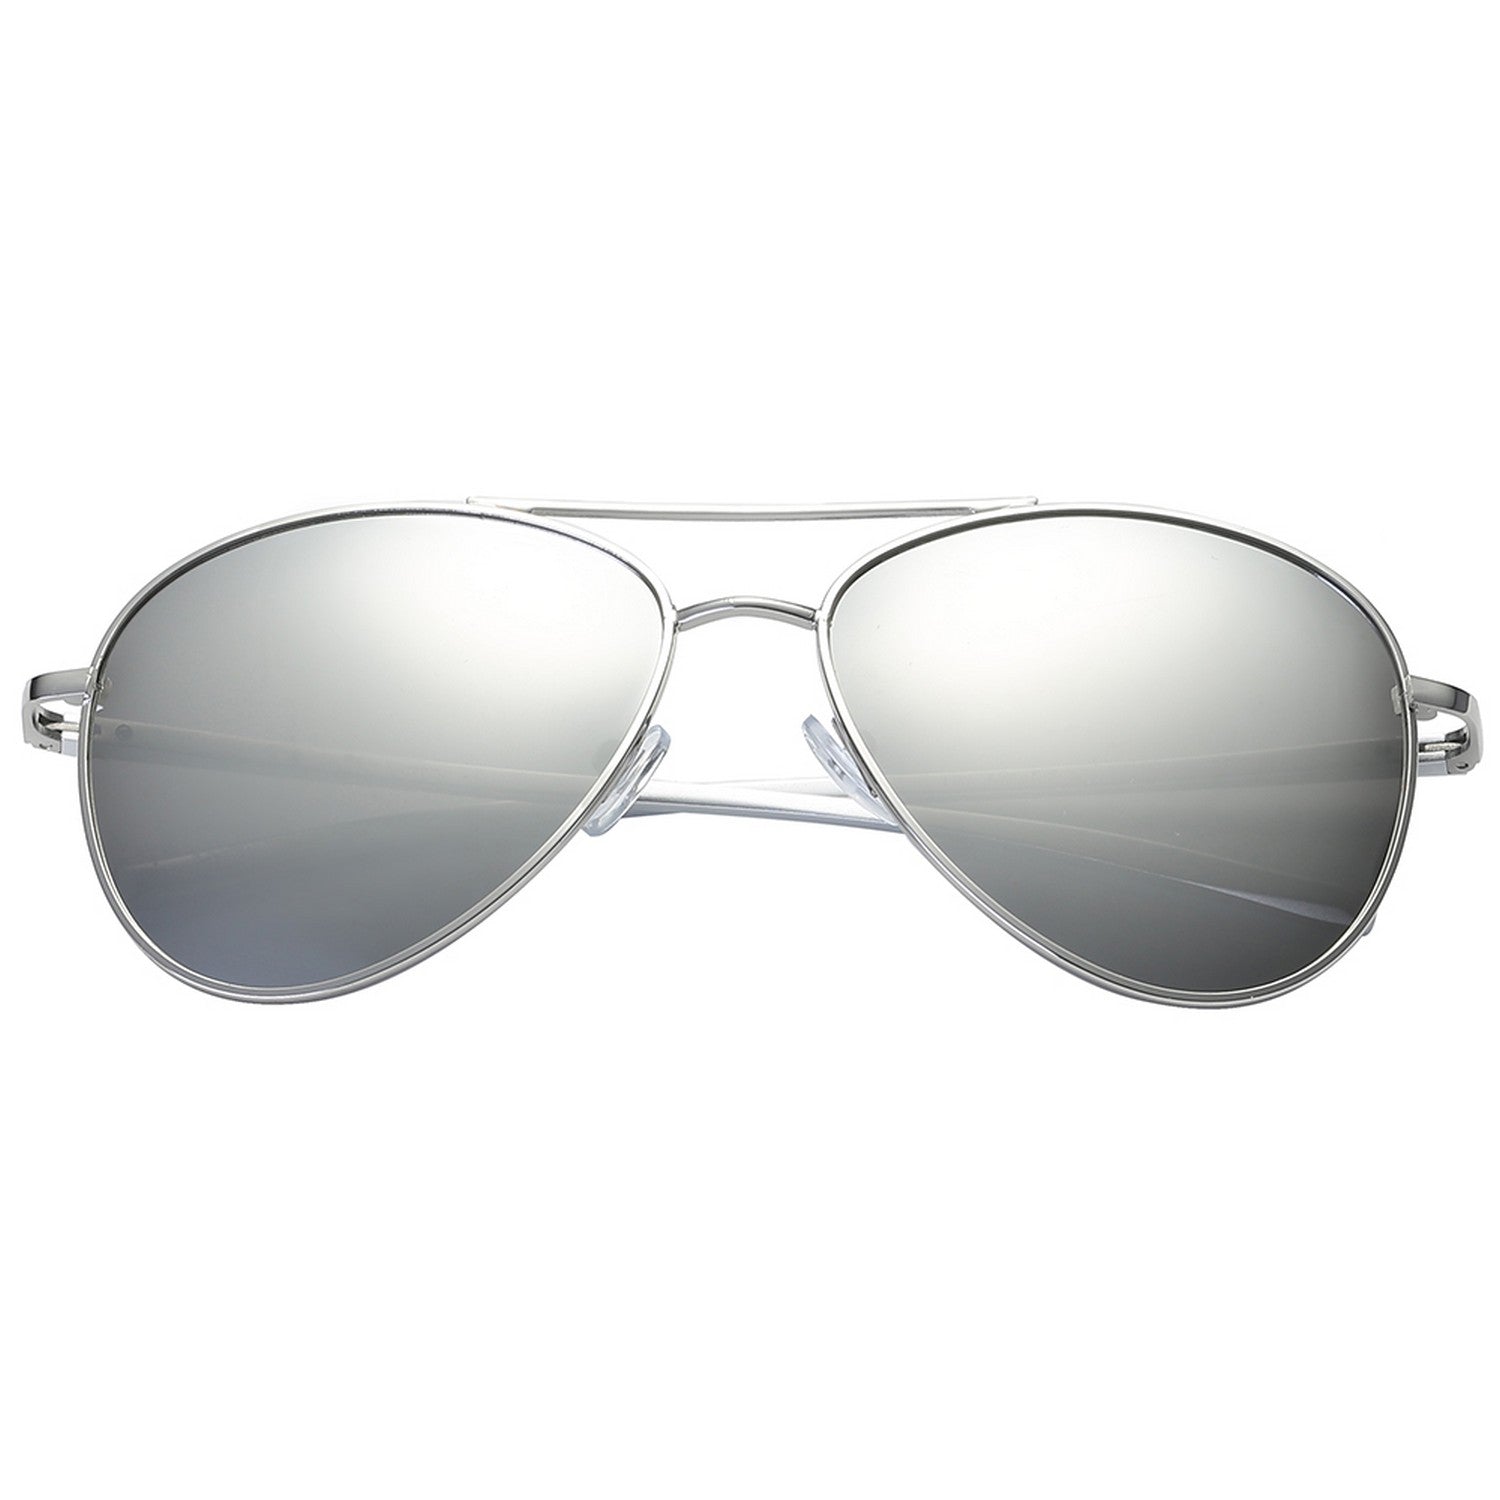 Polarspex Polarized Aviator Style Sunglasses with Aluminum Silver Frames and Polarized Ice Tech Lenses for Men and Women